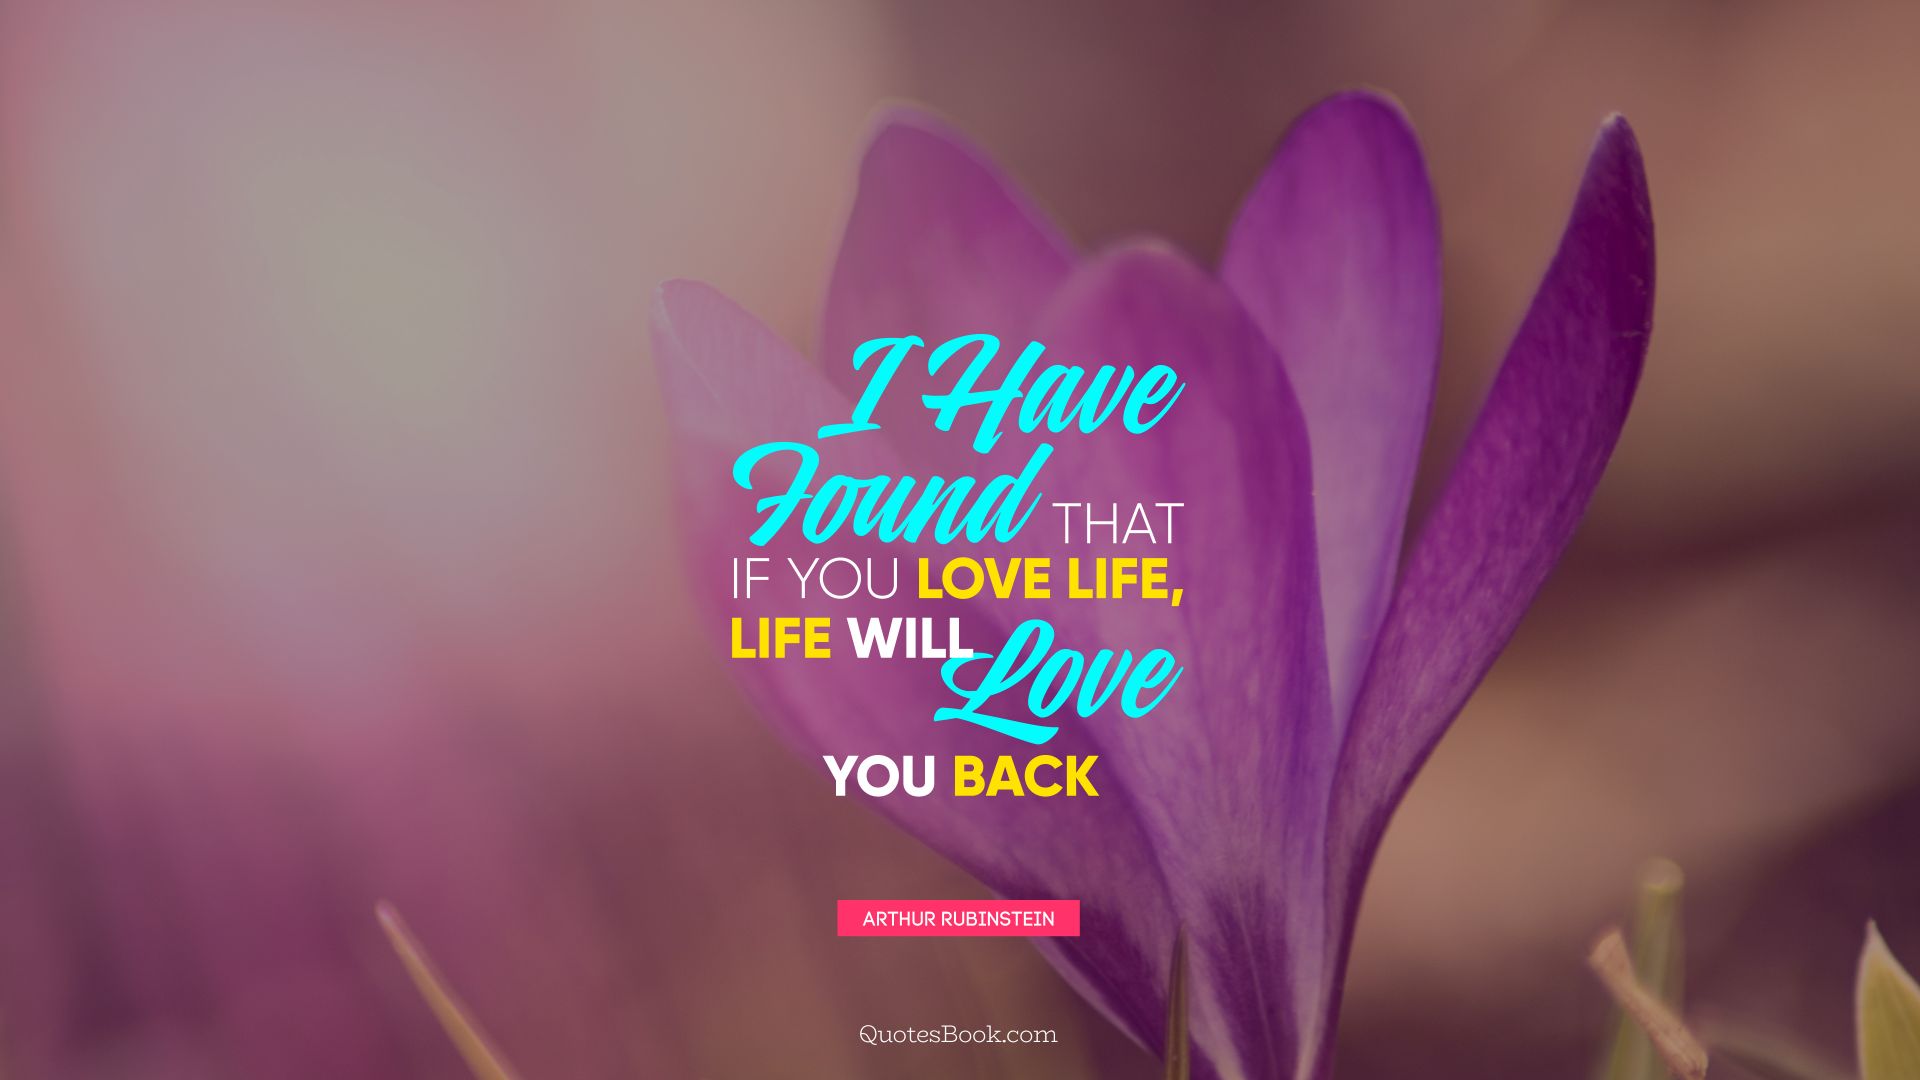 I have found that if you love life, life will love you back. - Quote by Arthur Rubinstein